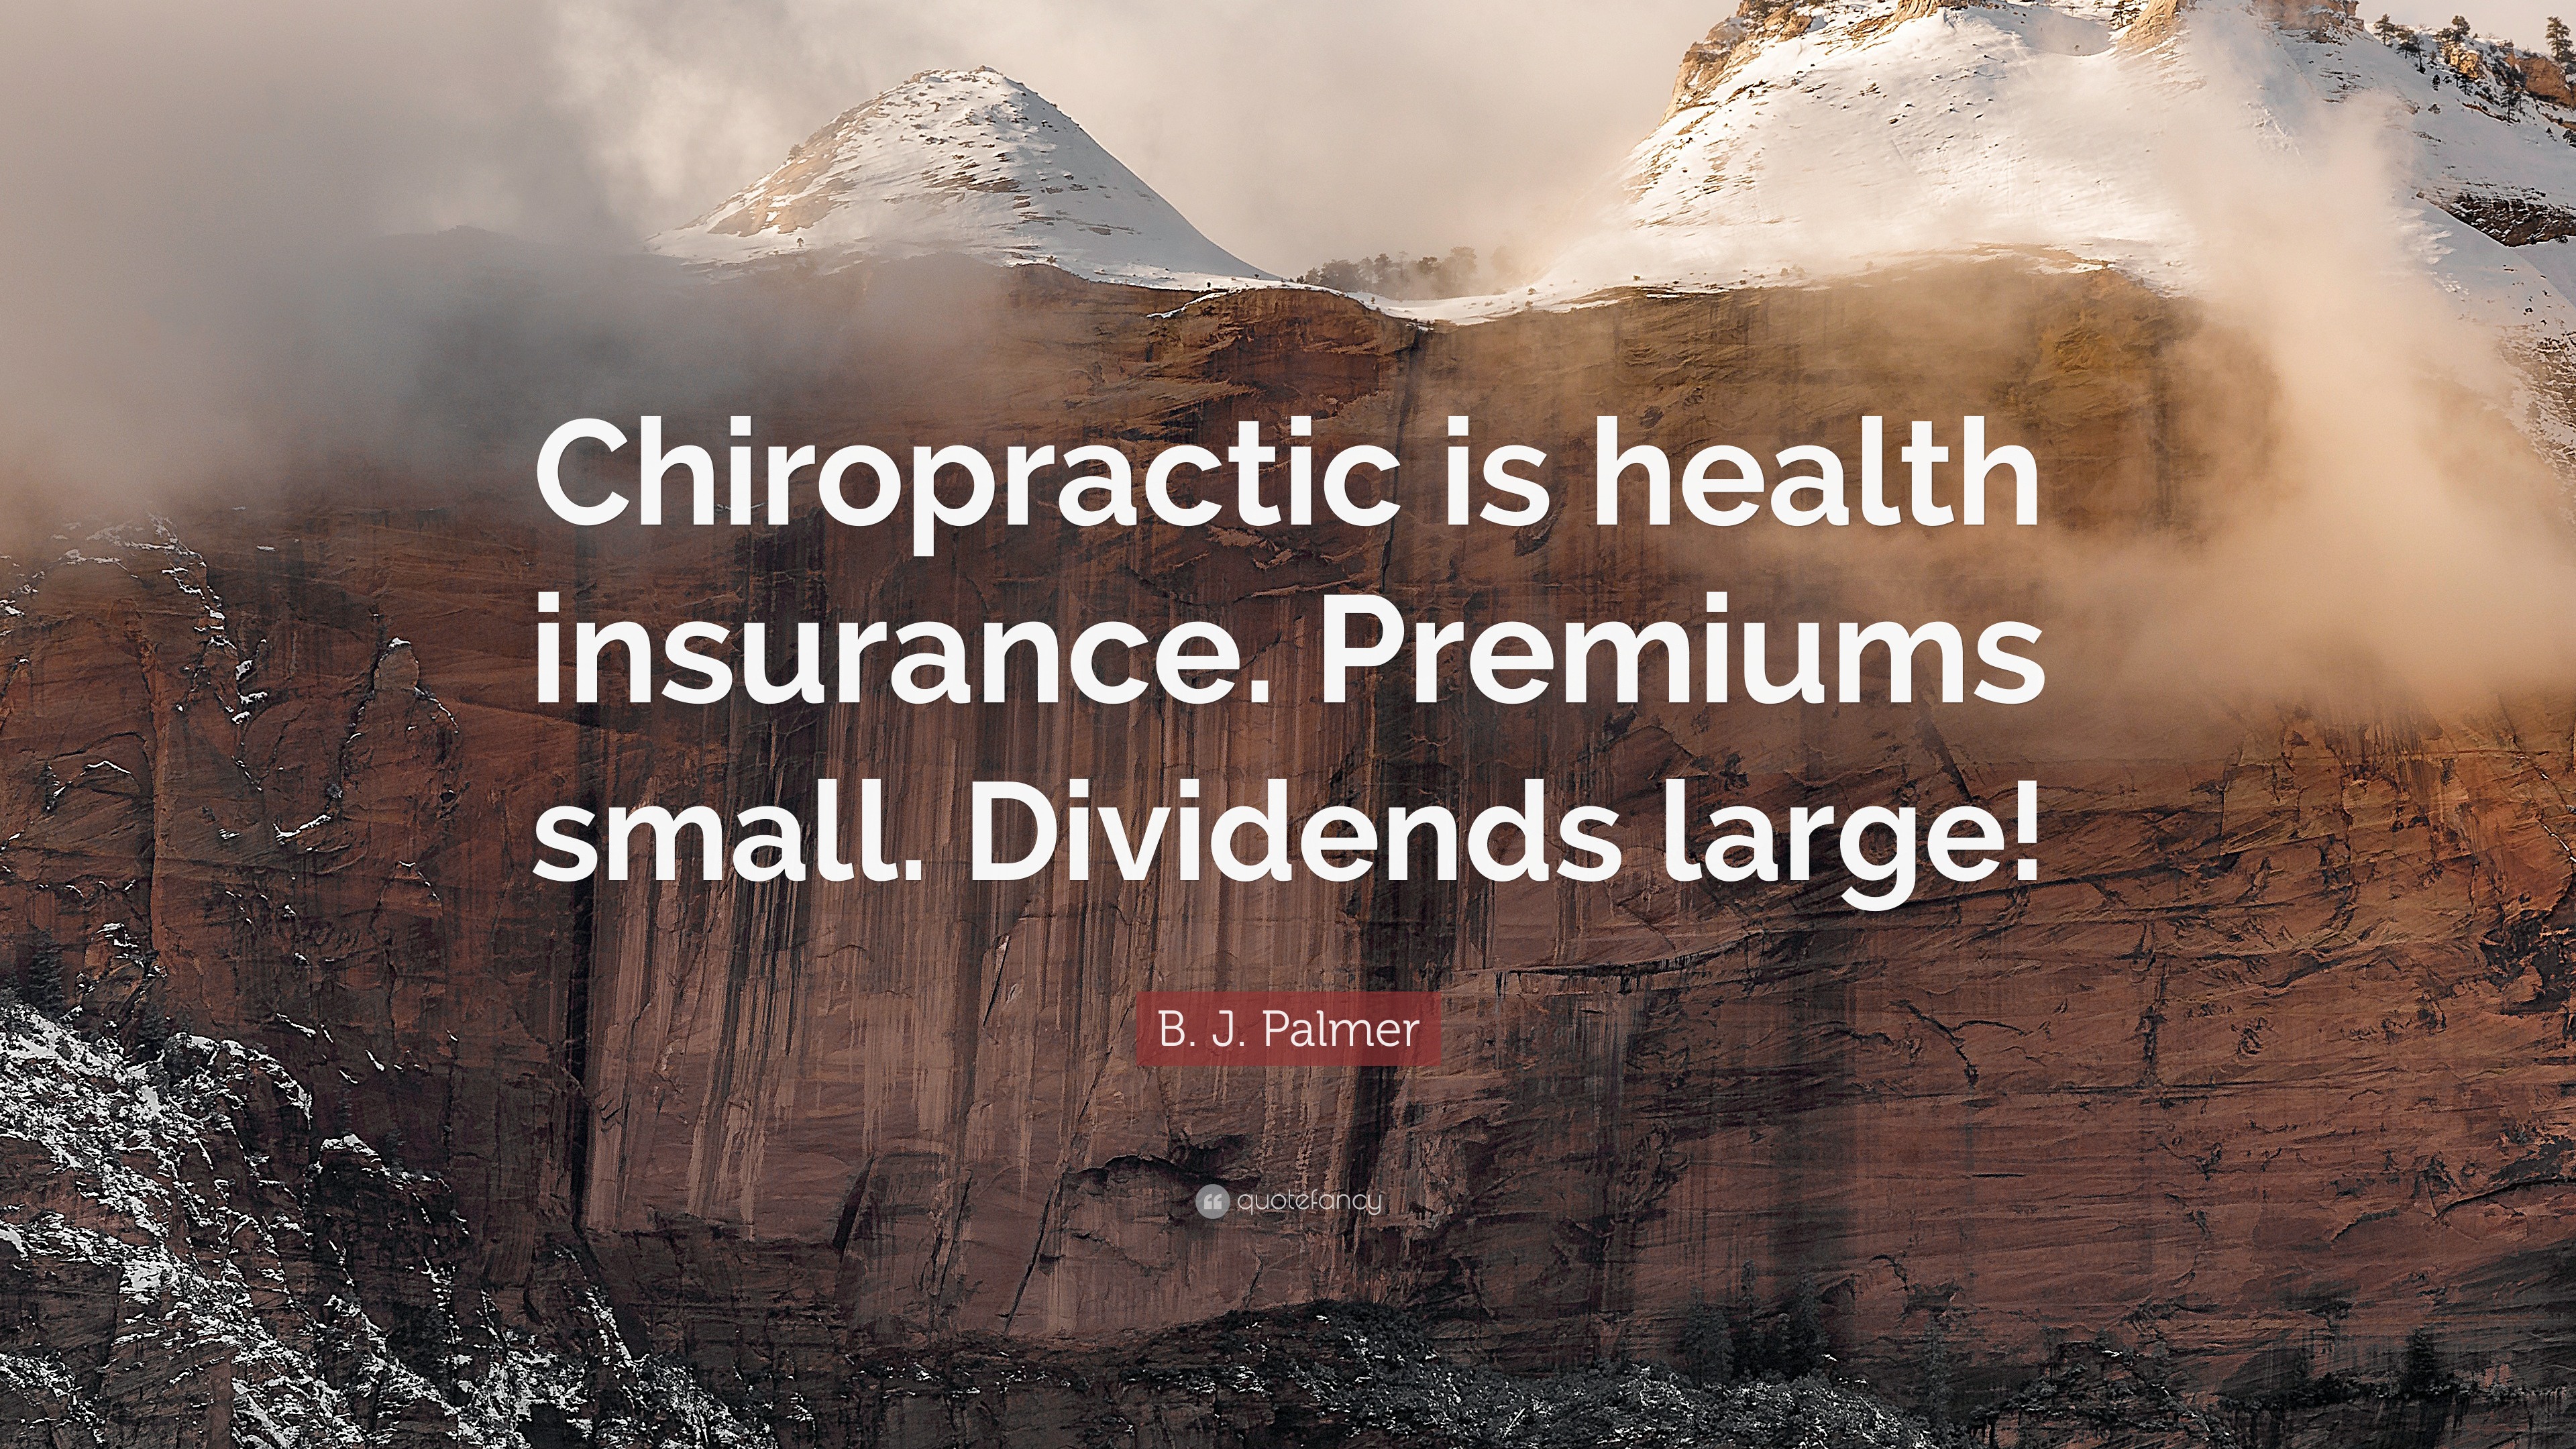 B. J. Palmer Quote: “Chiropractic is health insurance. Premiums small